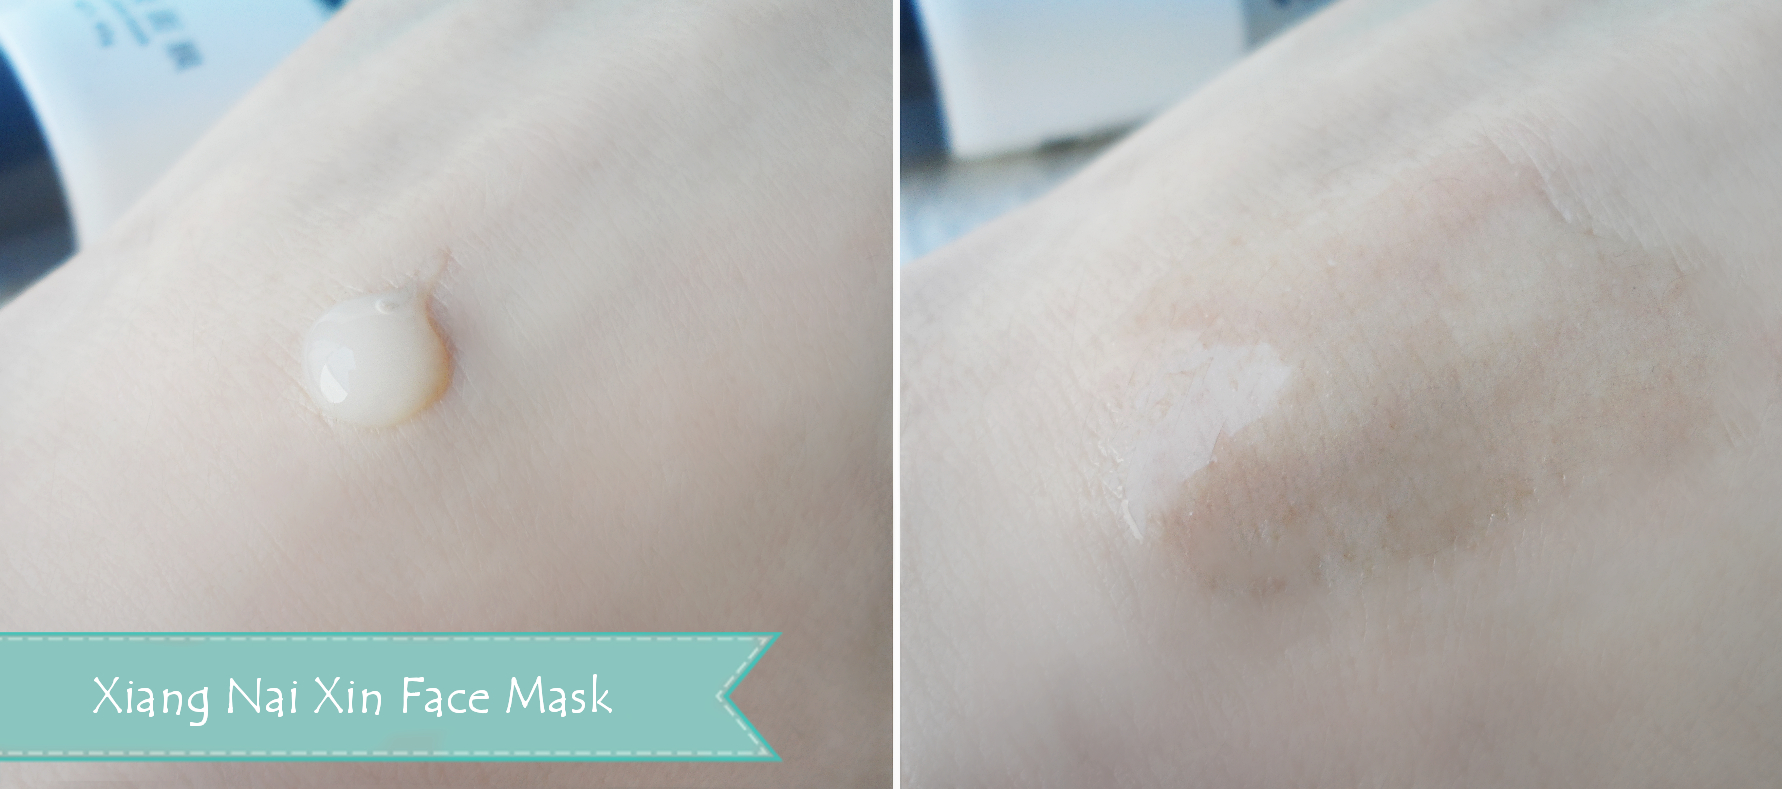 Xiang Nai Xin Suction Peel Off Mask Freckle Rejuvenation asian beauty mask products review pictures